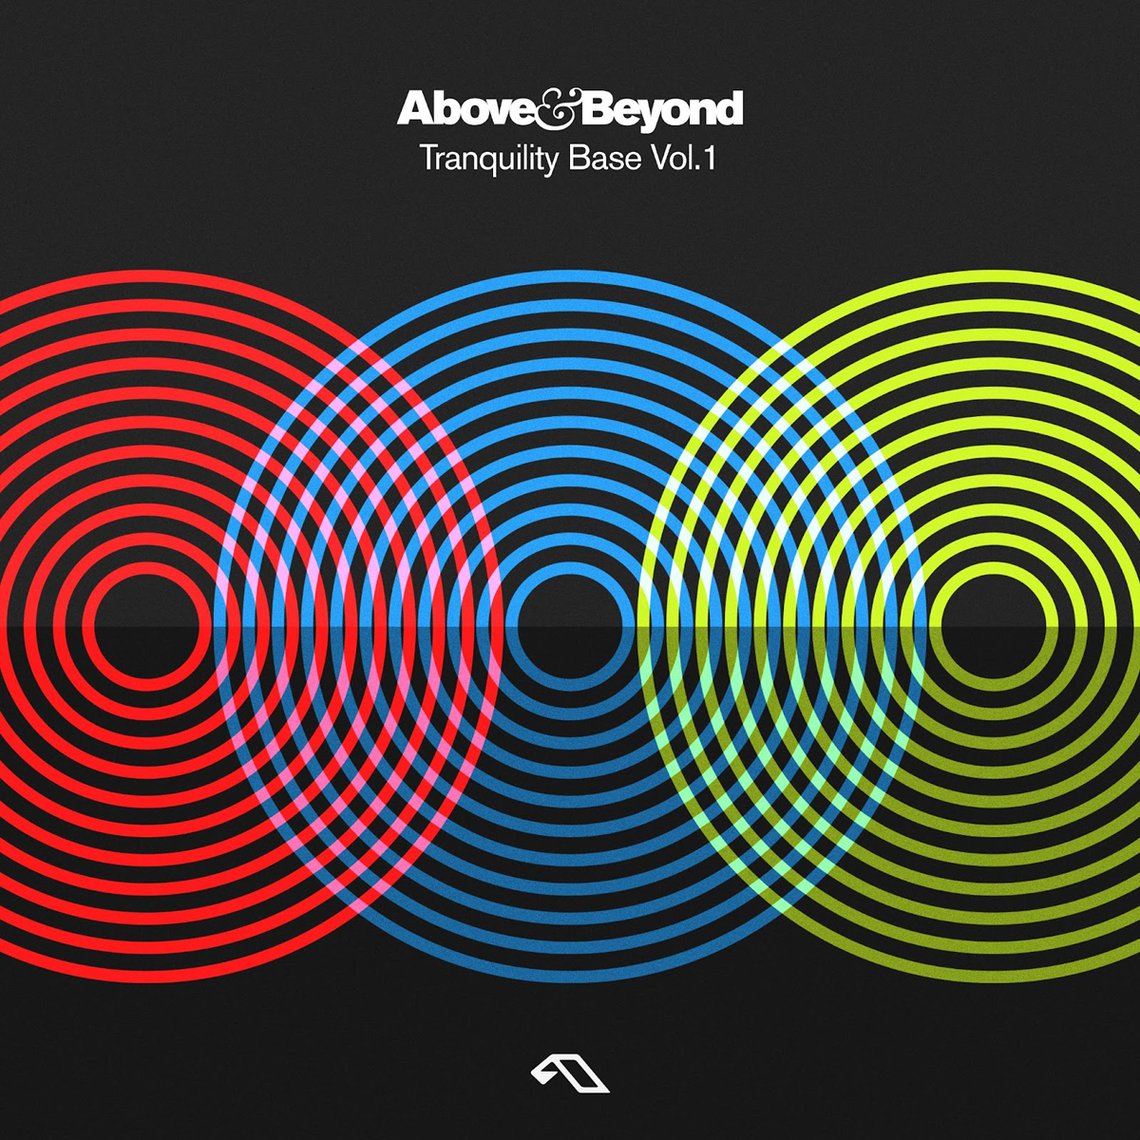 Above & Beyond returns to the dancefloor with Tranquility Base Vol. 1